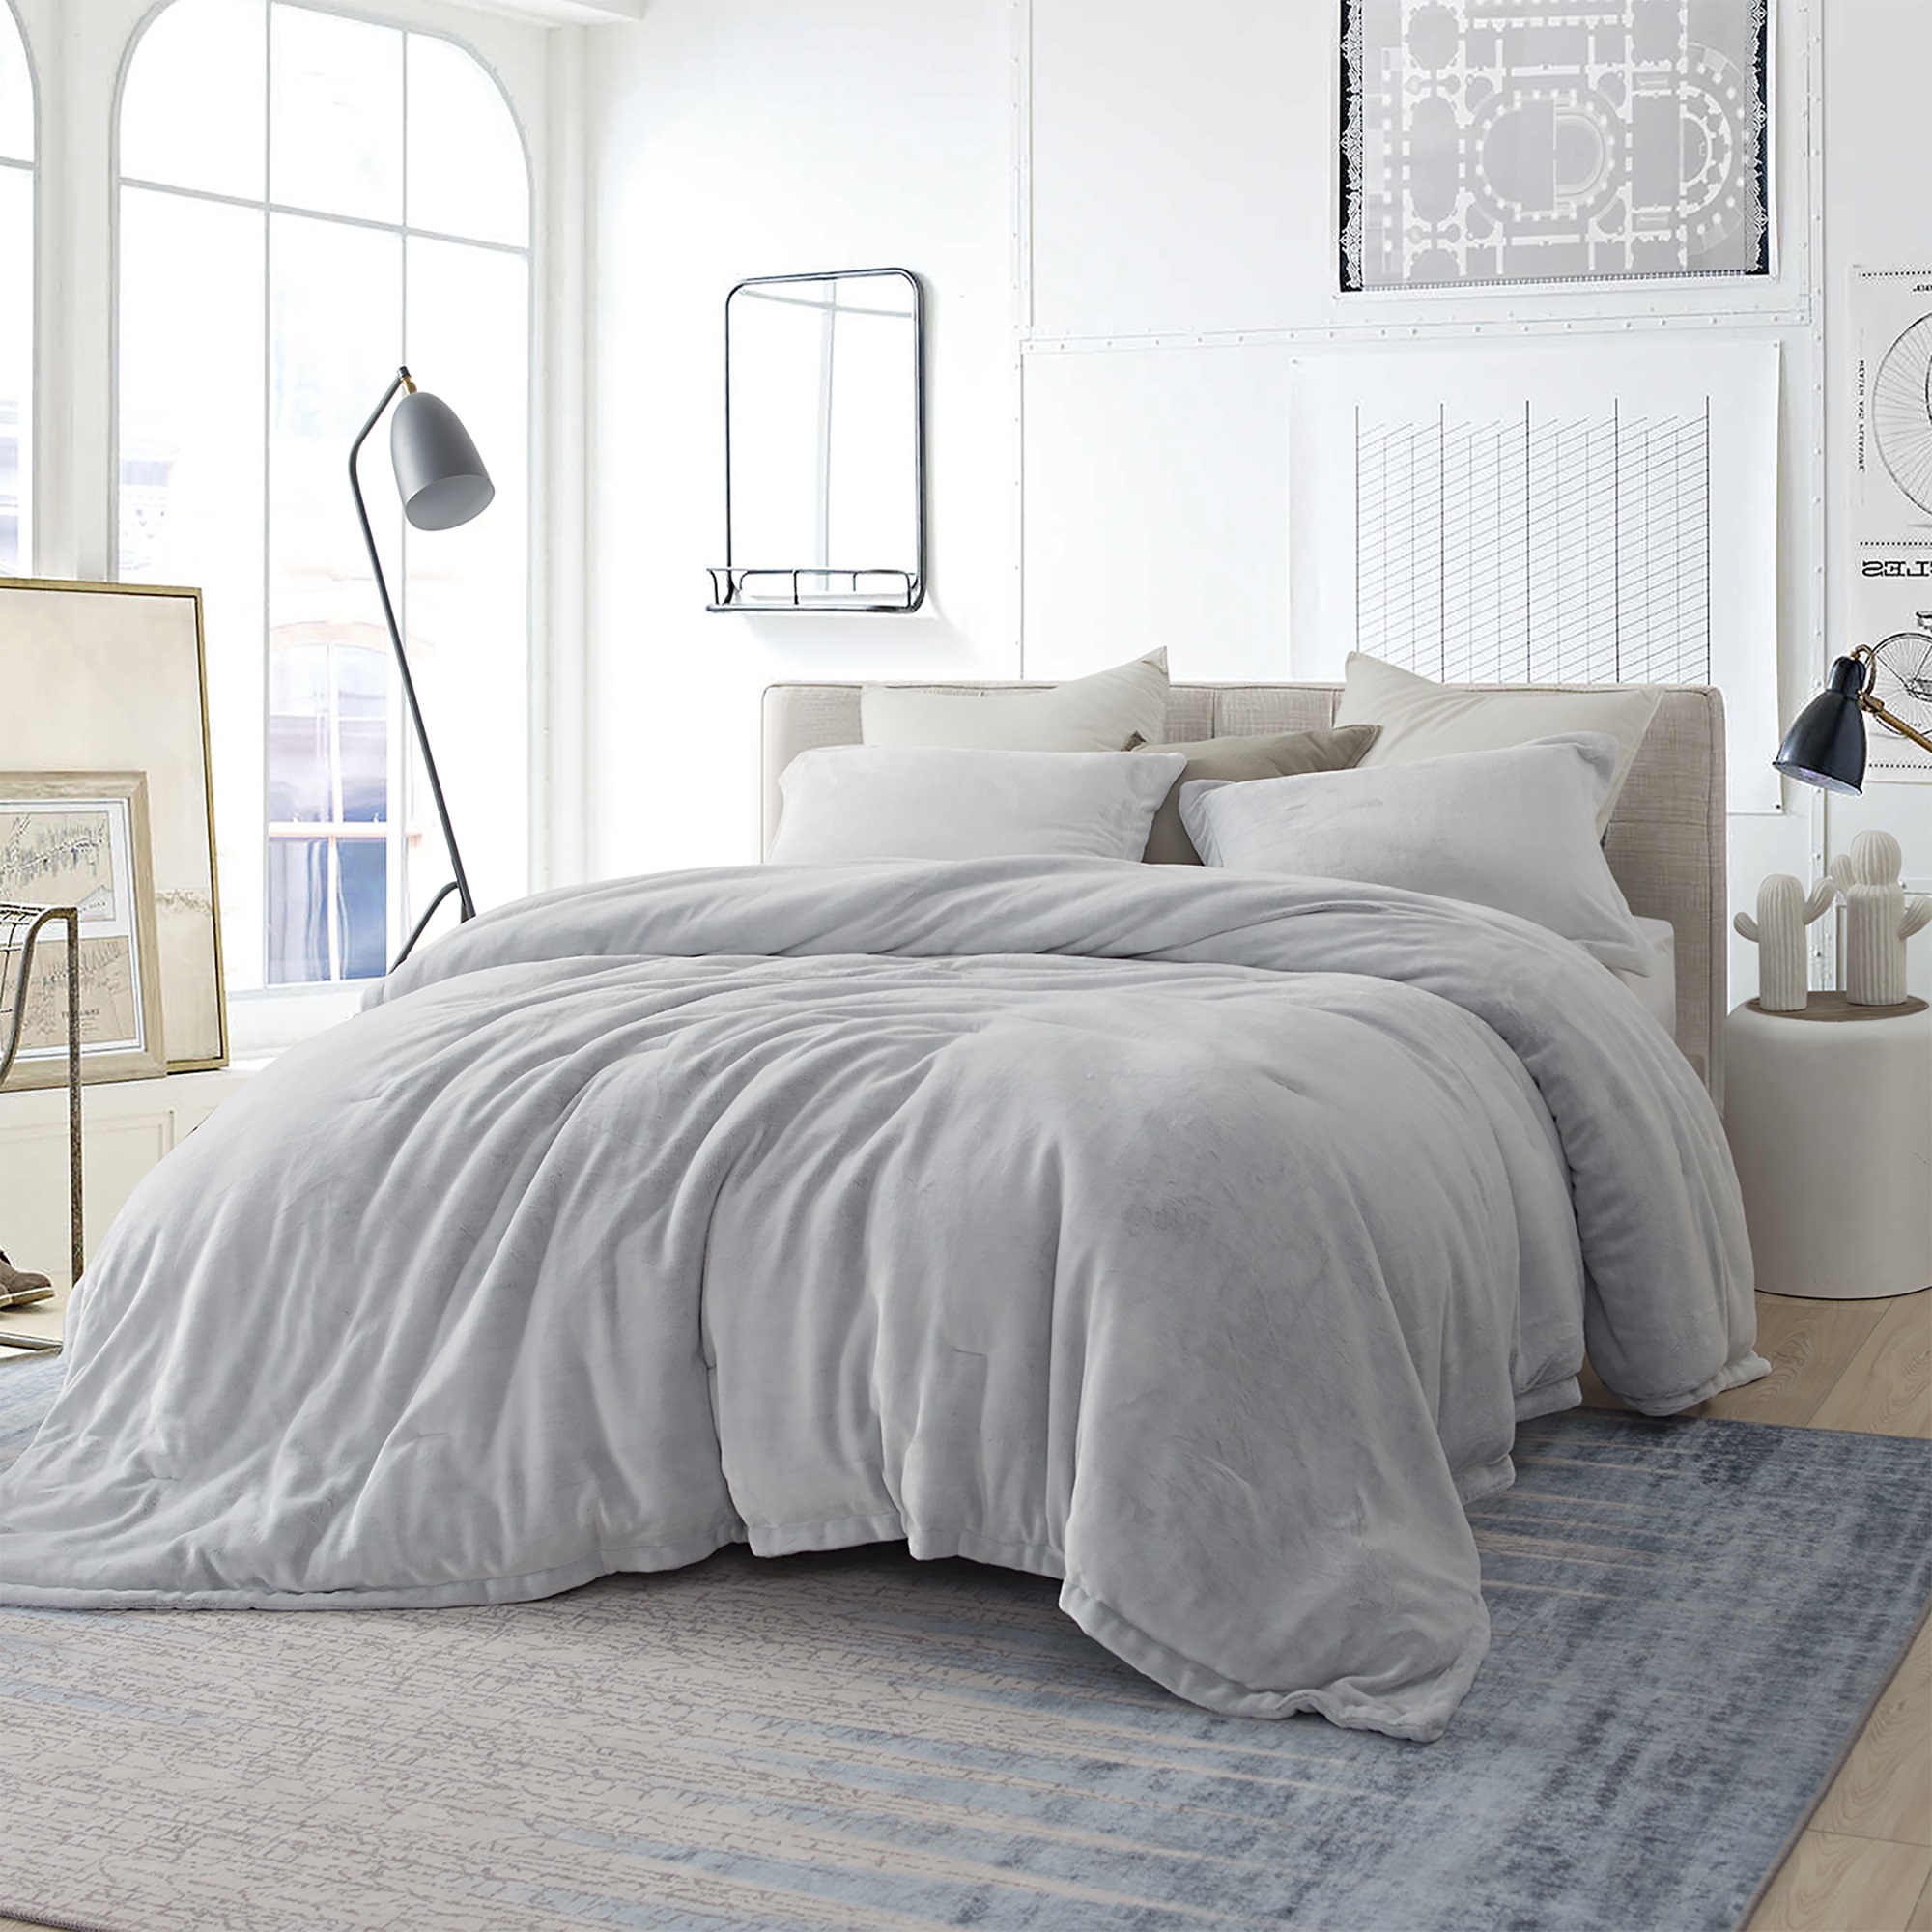 Coma Inducer® Comforter - Oversized Bedding - Frosted - Granite Gray